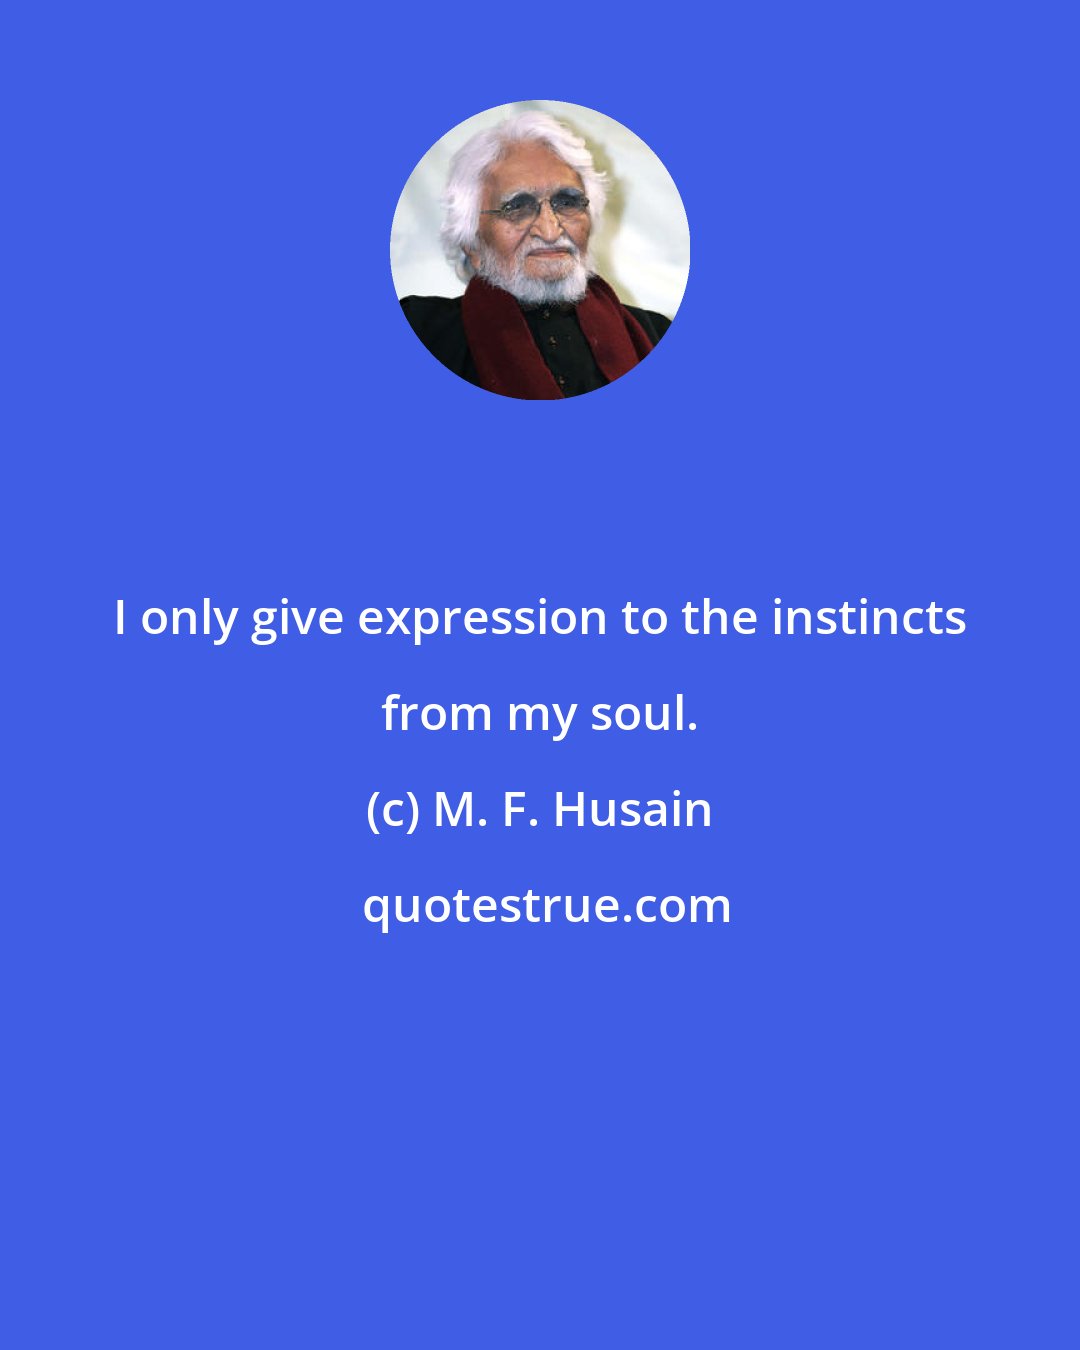 M. F. Husain: I only give expression to the instincts from my soul.